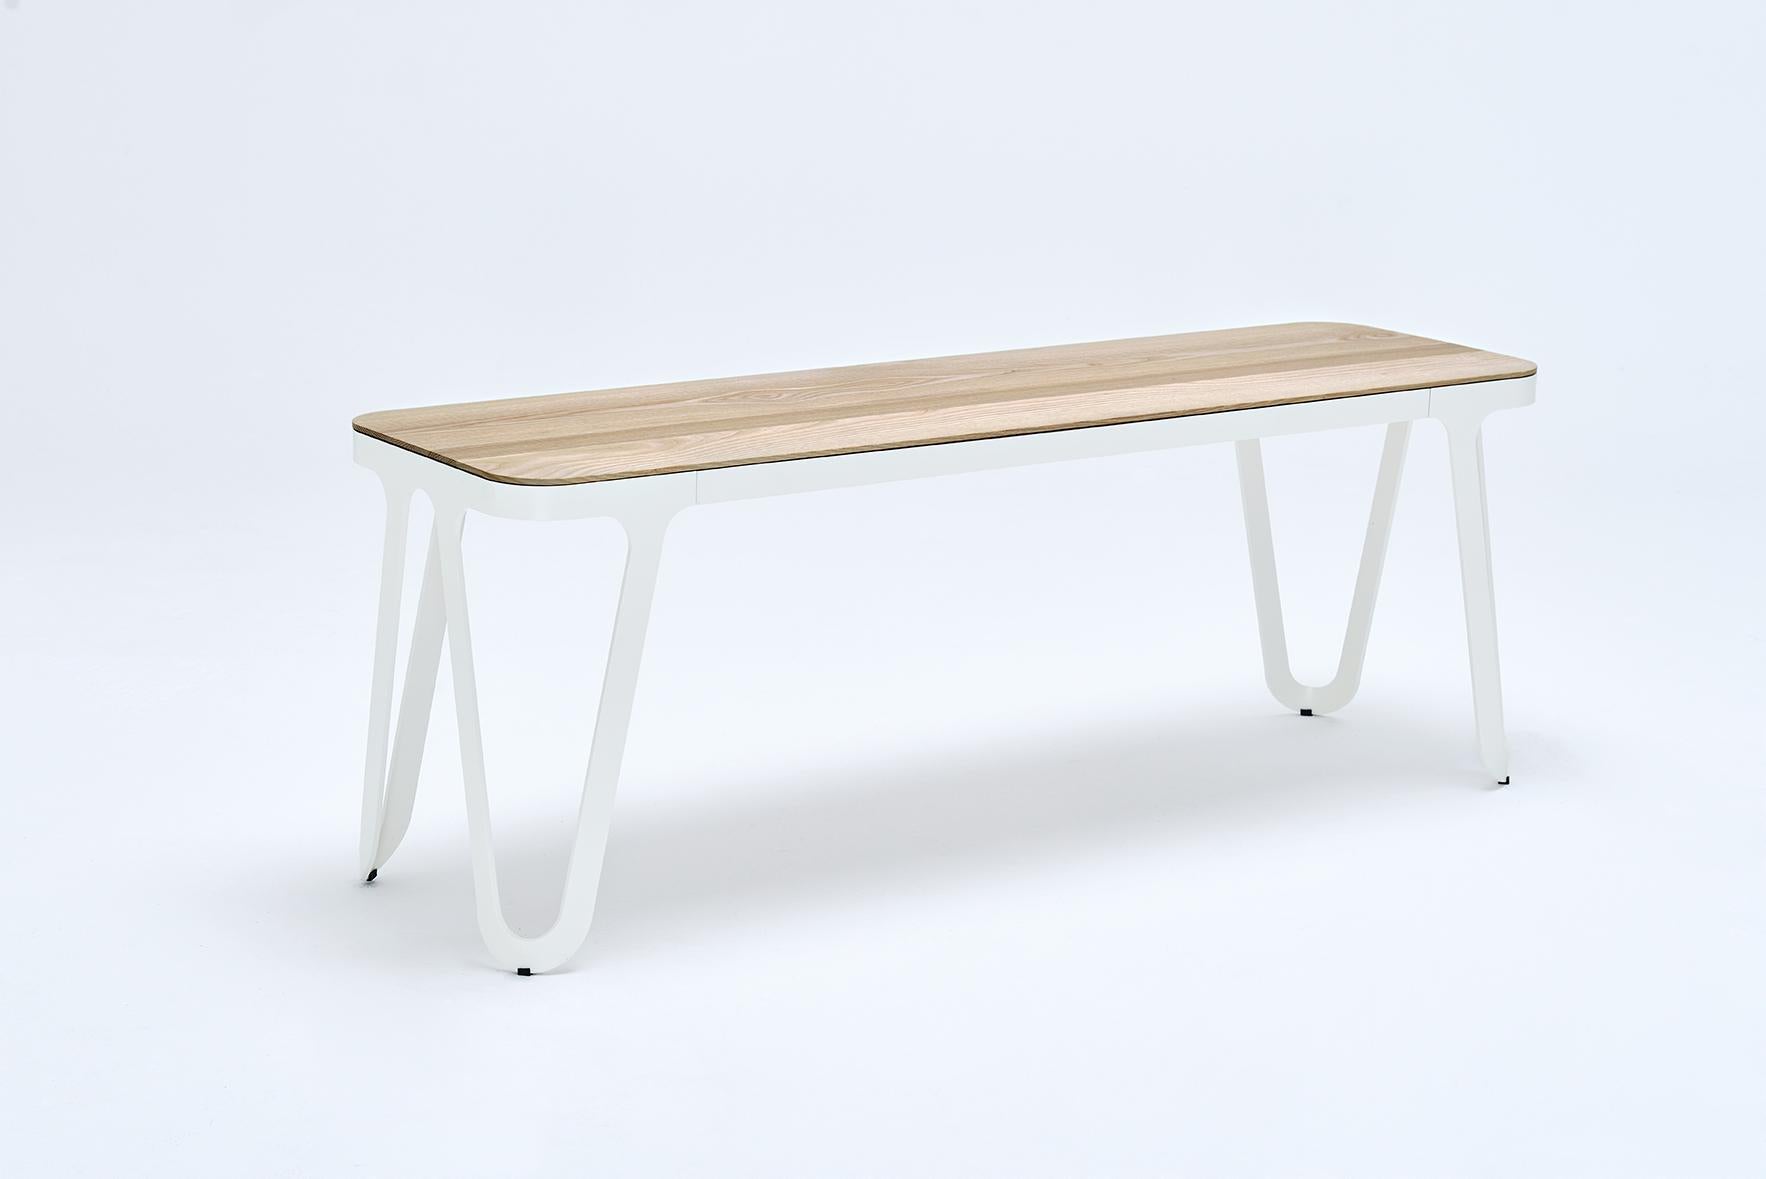 Loop Bench 120 walnut by Sebastian Scherer
Material: Aluminium, Walnut
Dimensions: D120x W38 x H45 cm.
Weight: 16.4 kg
Also Available: Colours: solid wood (matt lacquered): black and white stained ash / natural oak / american walnut
frame